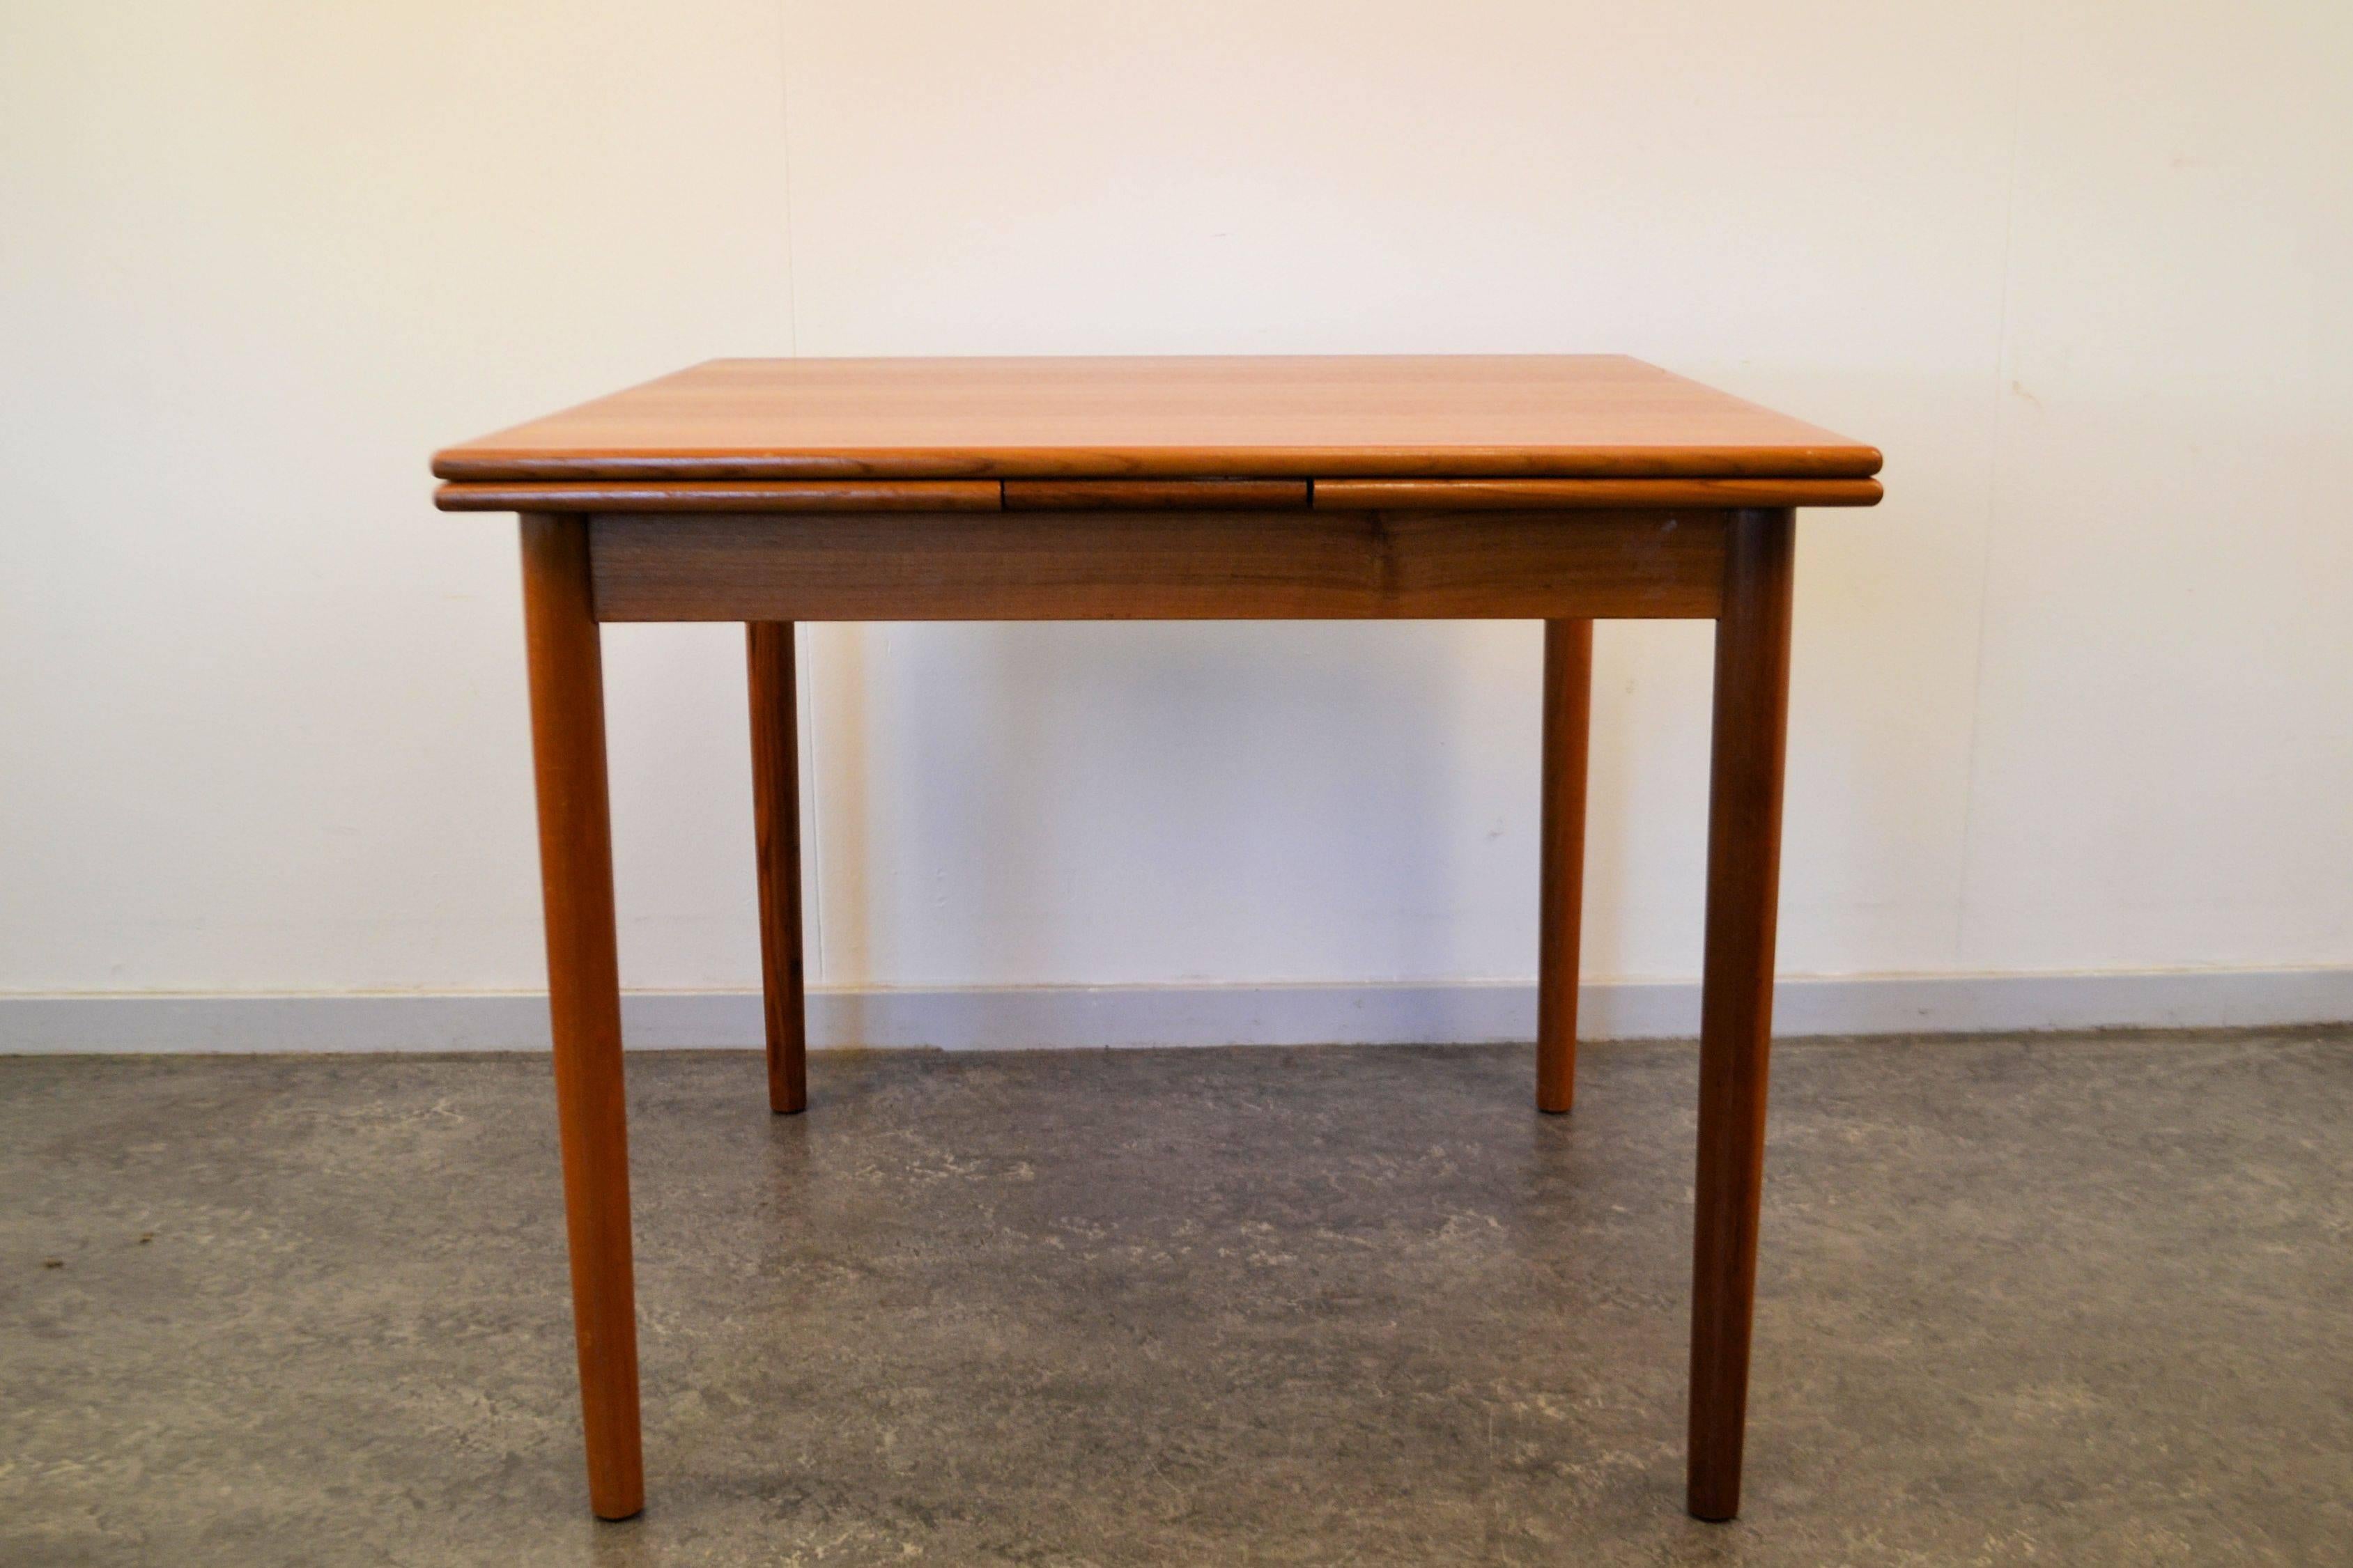 Mid-Century Modern square teak dining table. This table has been produced in Denmark (sticker under table) during the 1960s and has two extension leaves, to make the table a total length of 156 cm.